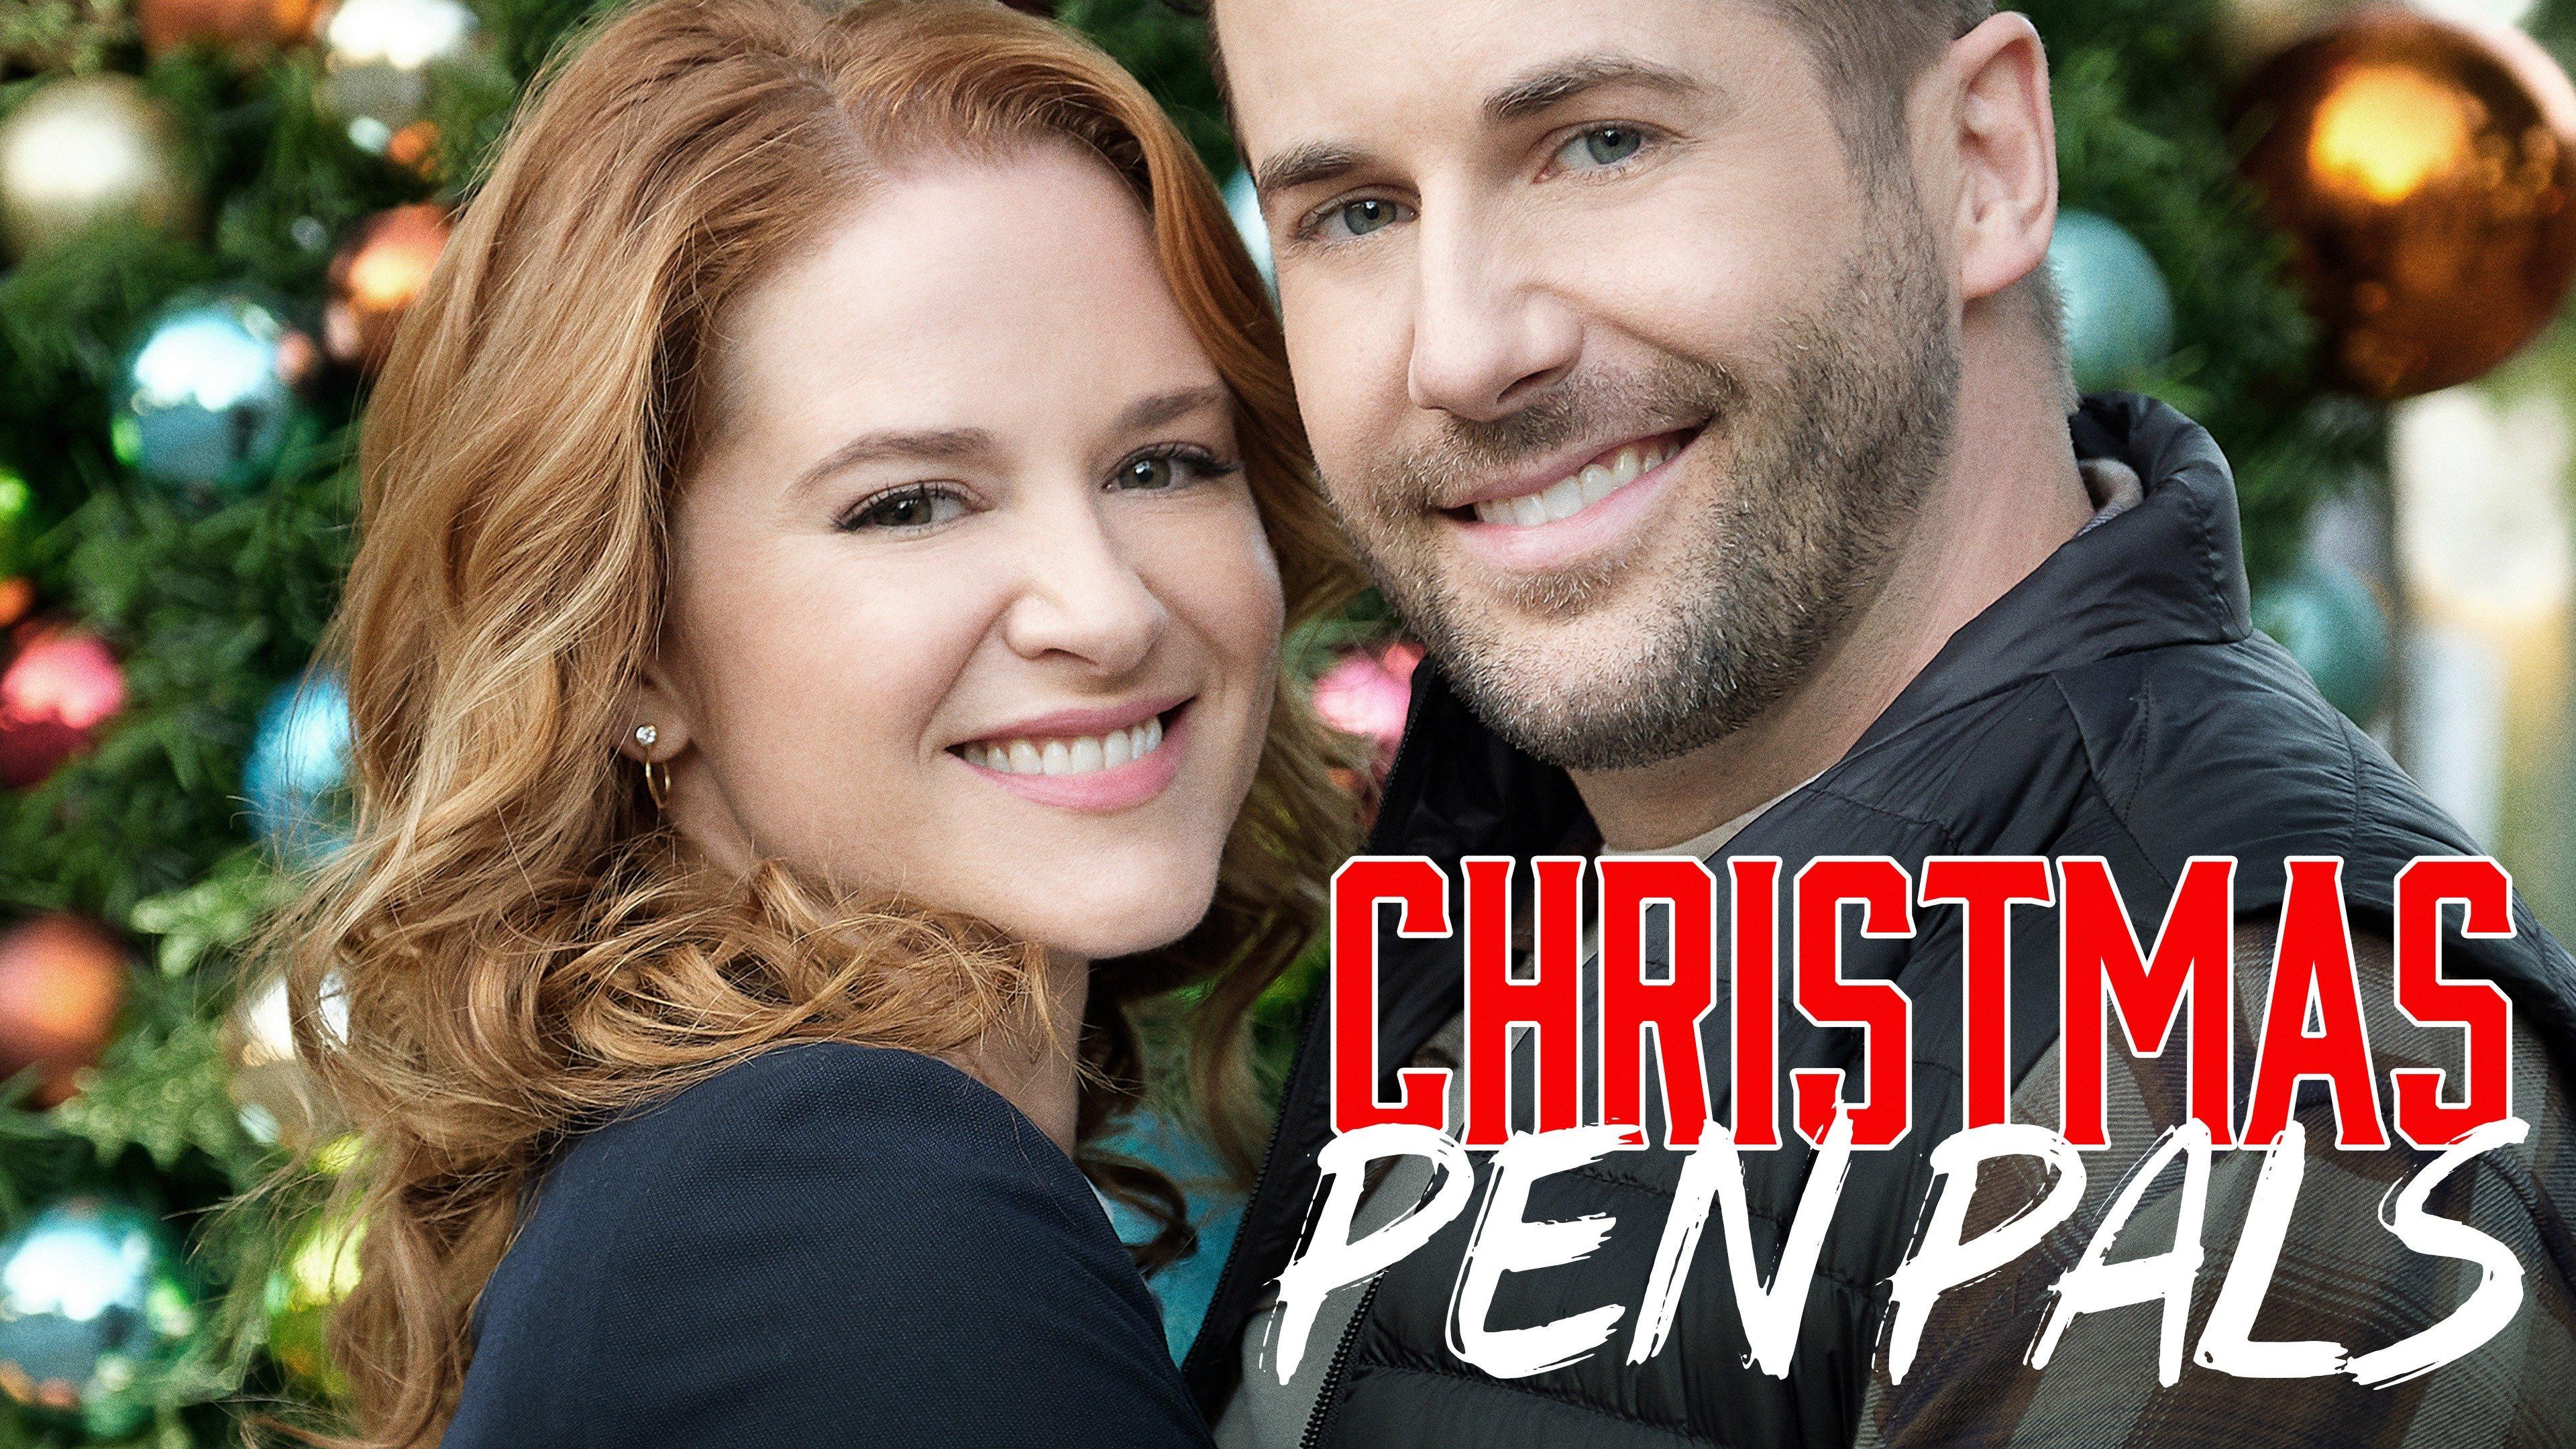 Watch Christmas Pen Pals Streaming Online on Philo (Free Trial)